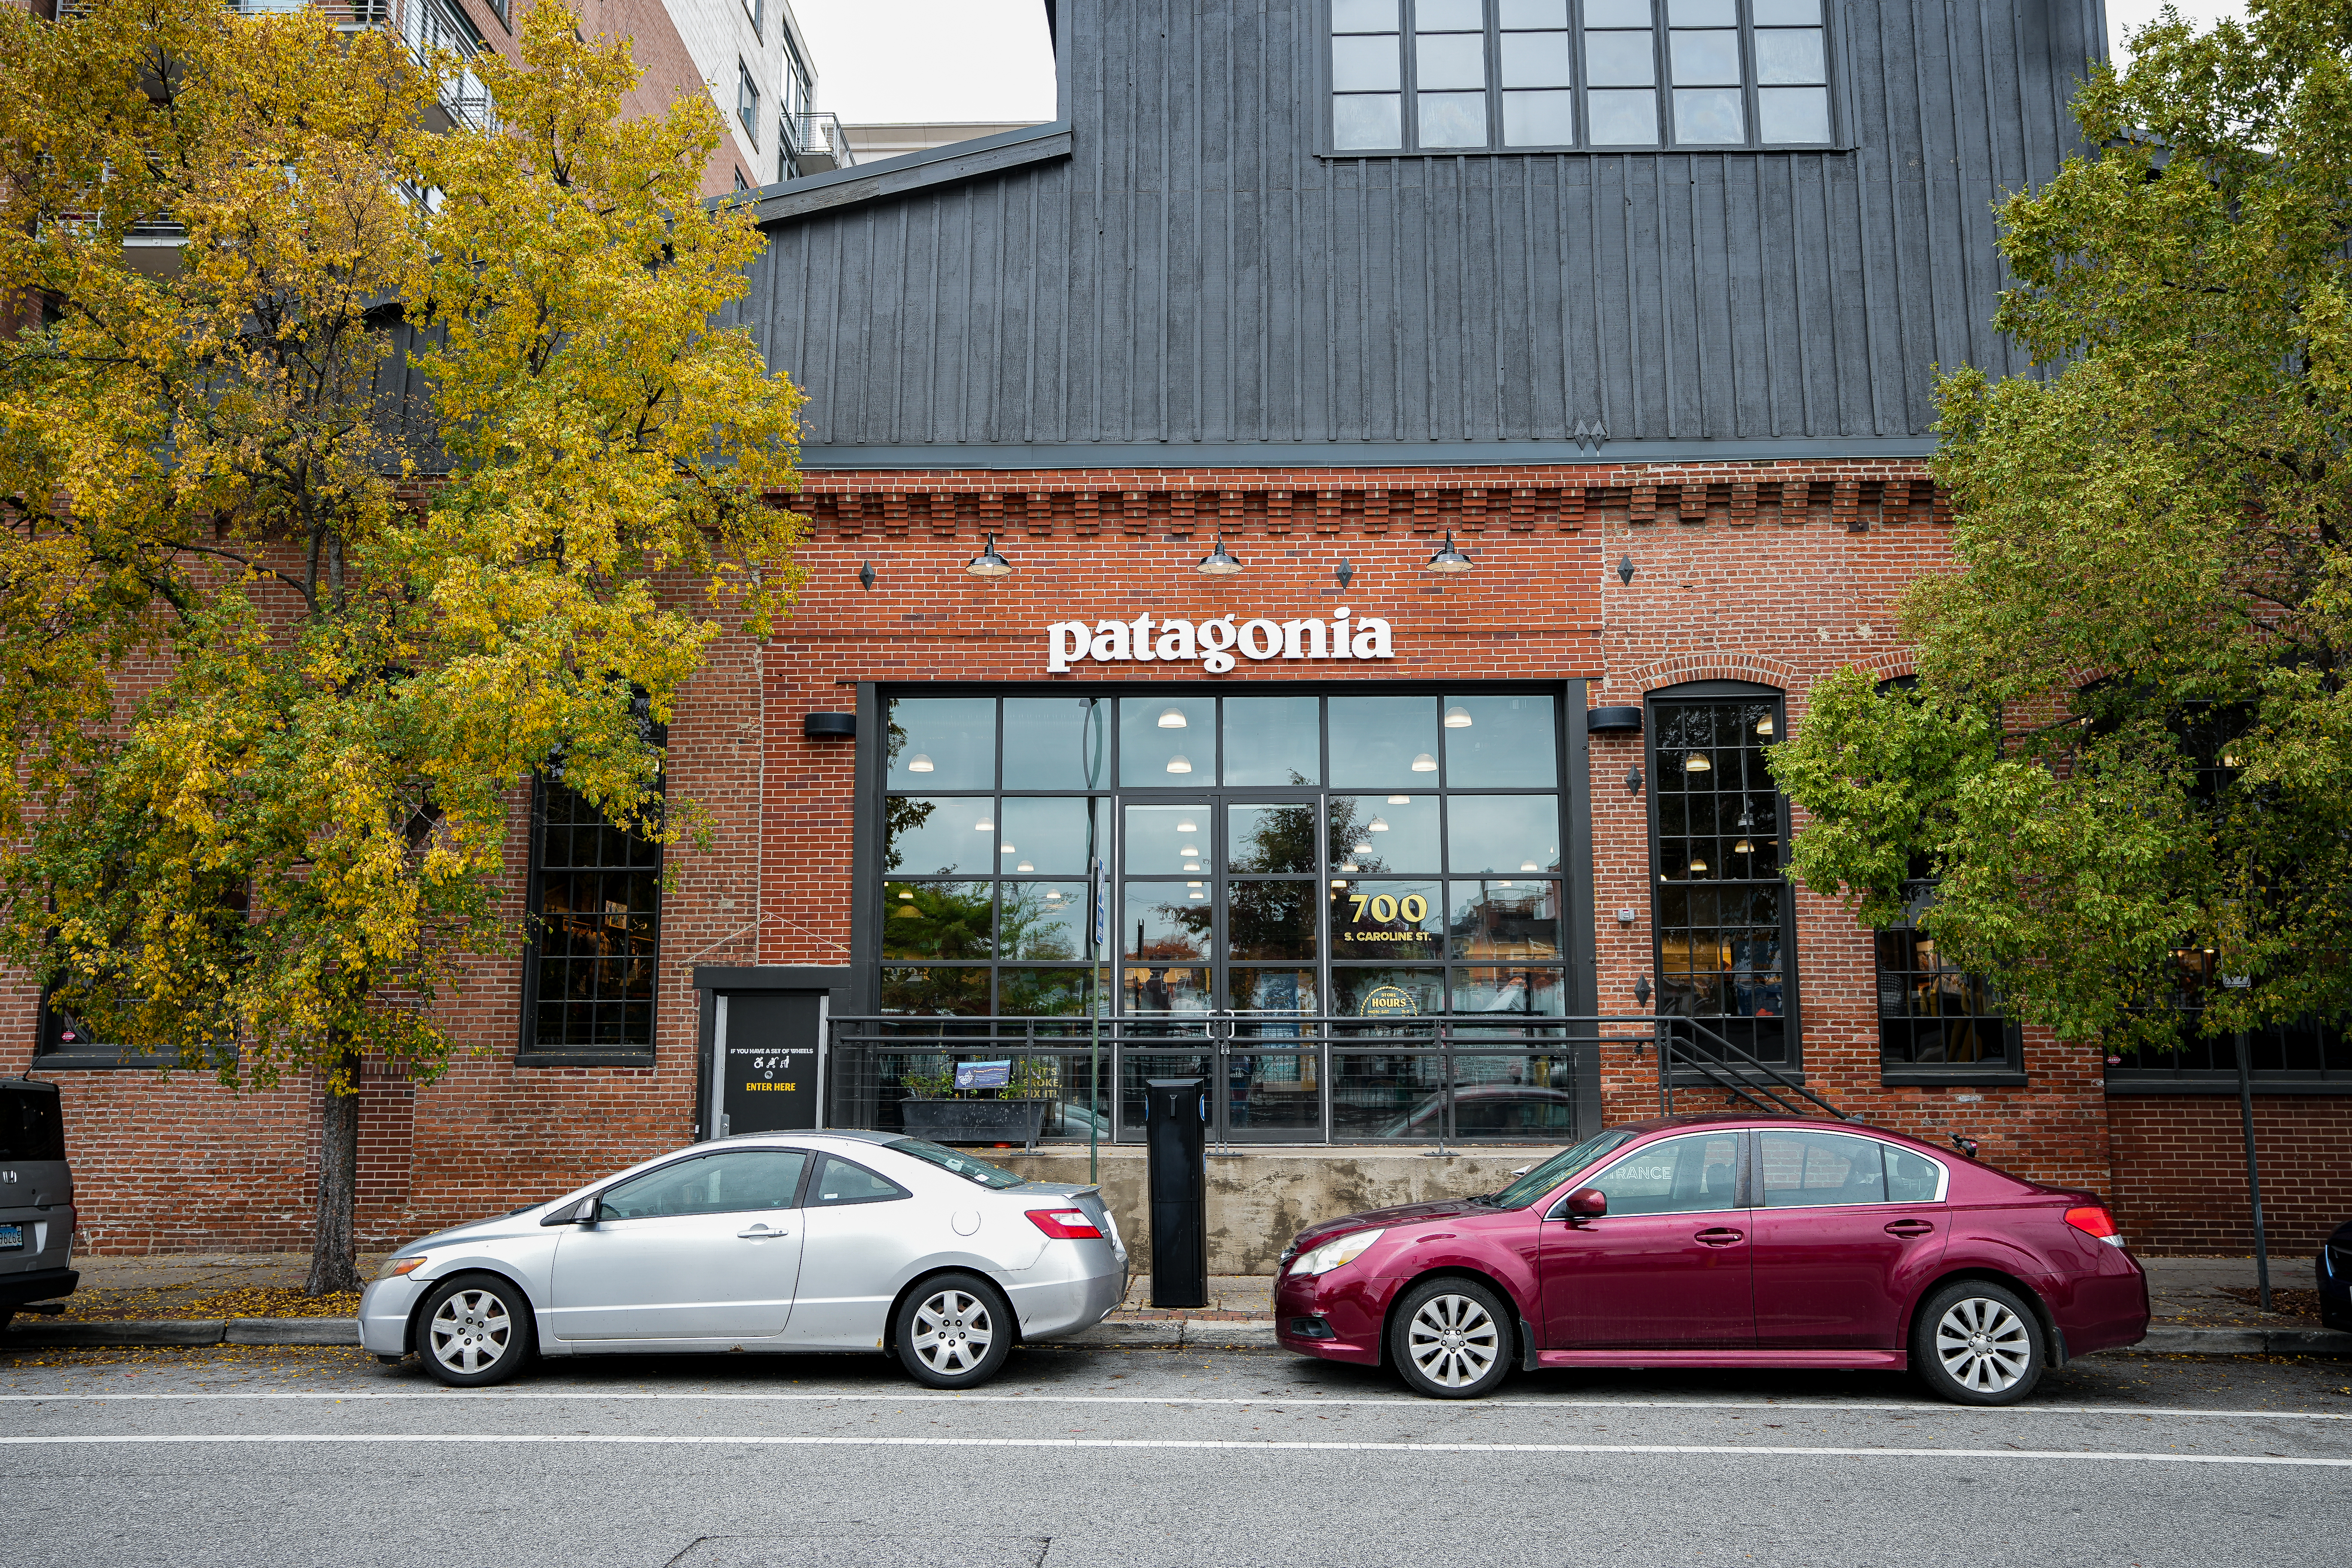 Patagonia in Fells Point, Baltimore.